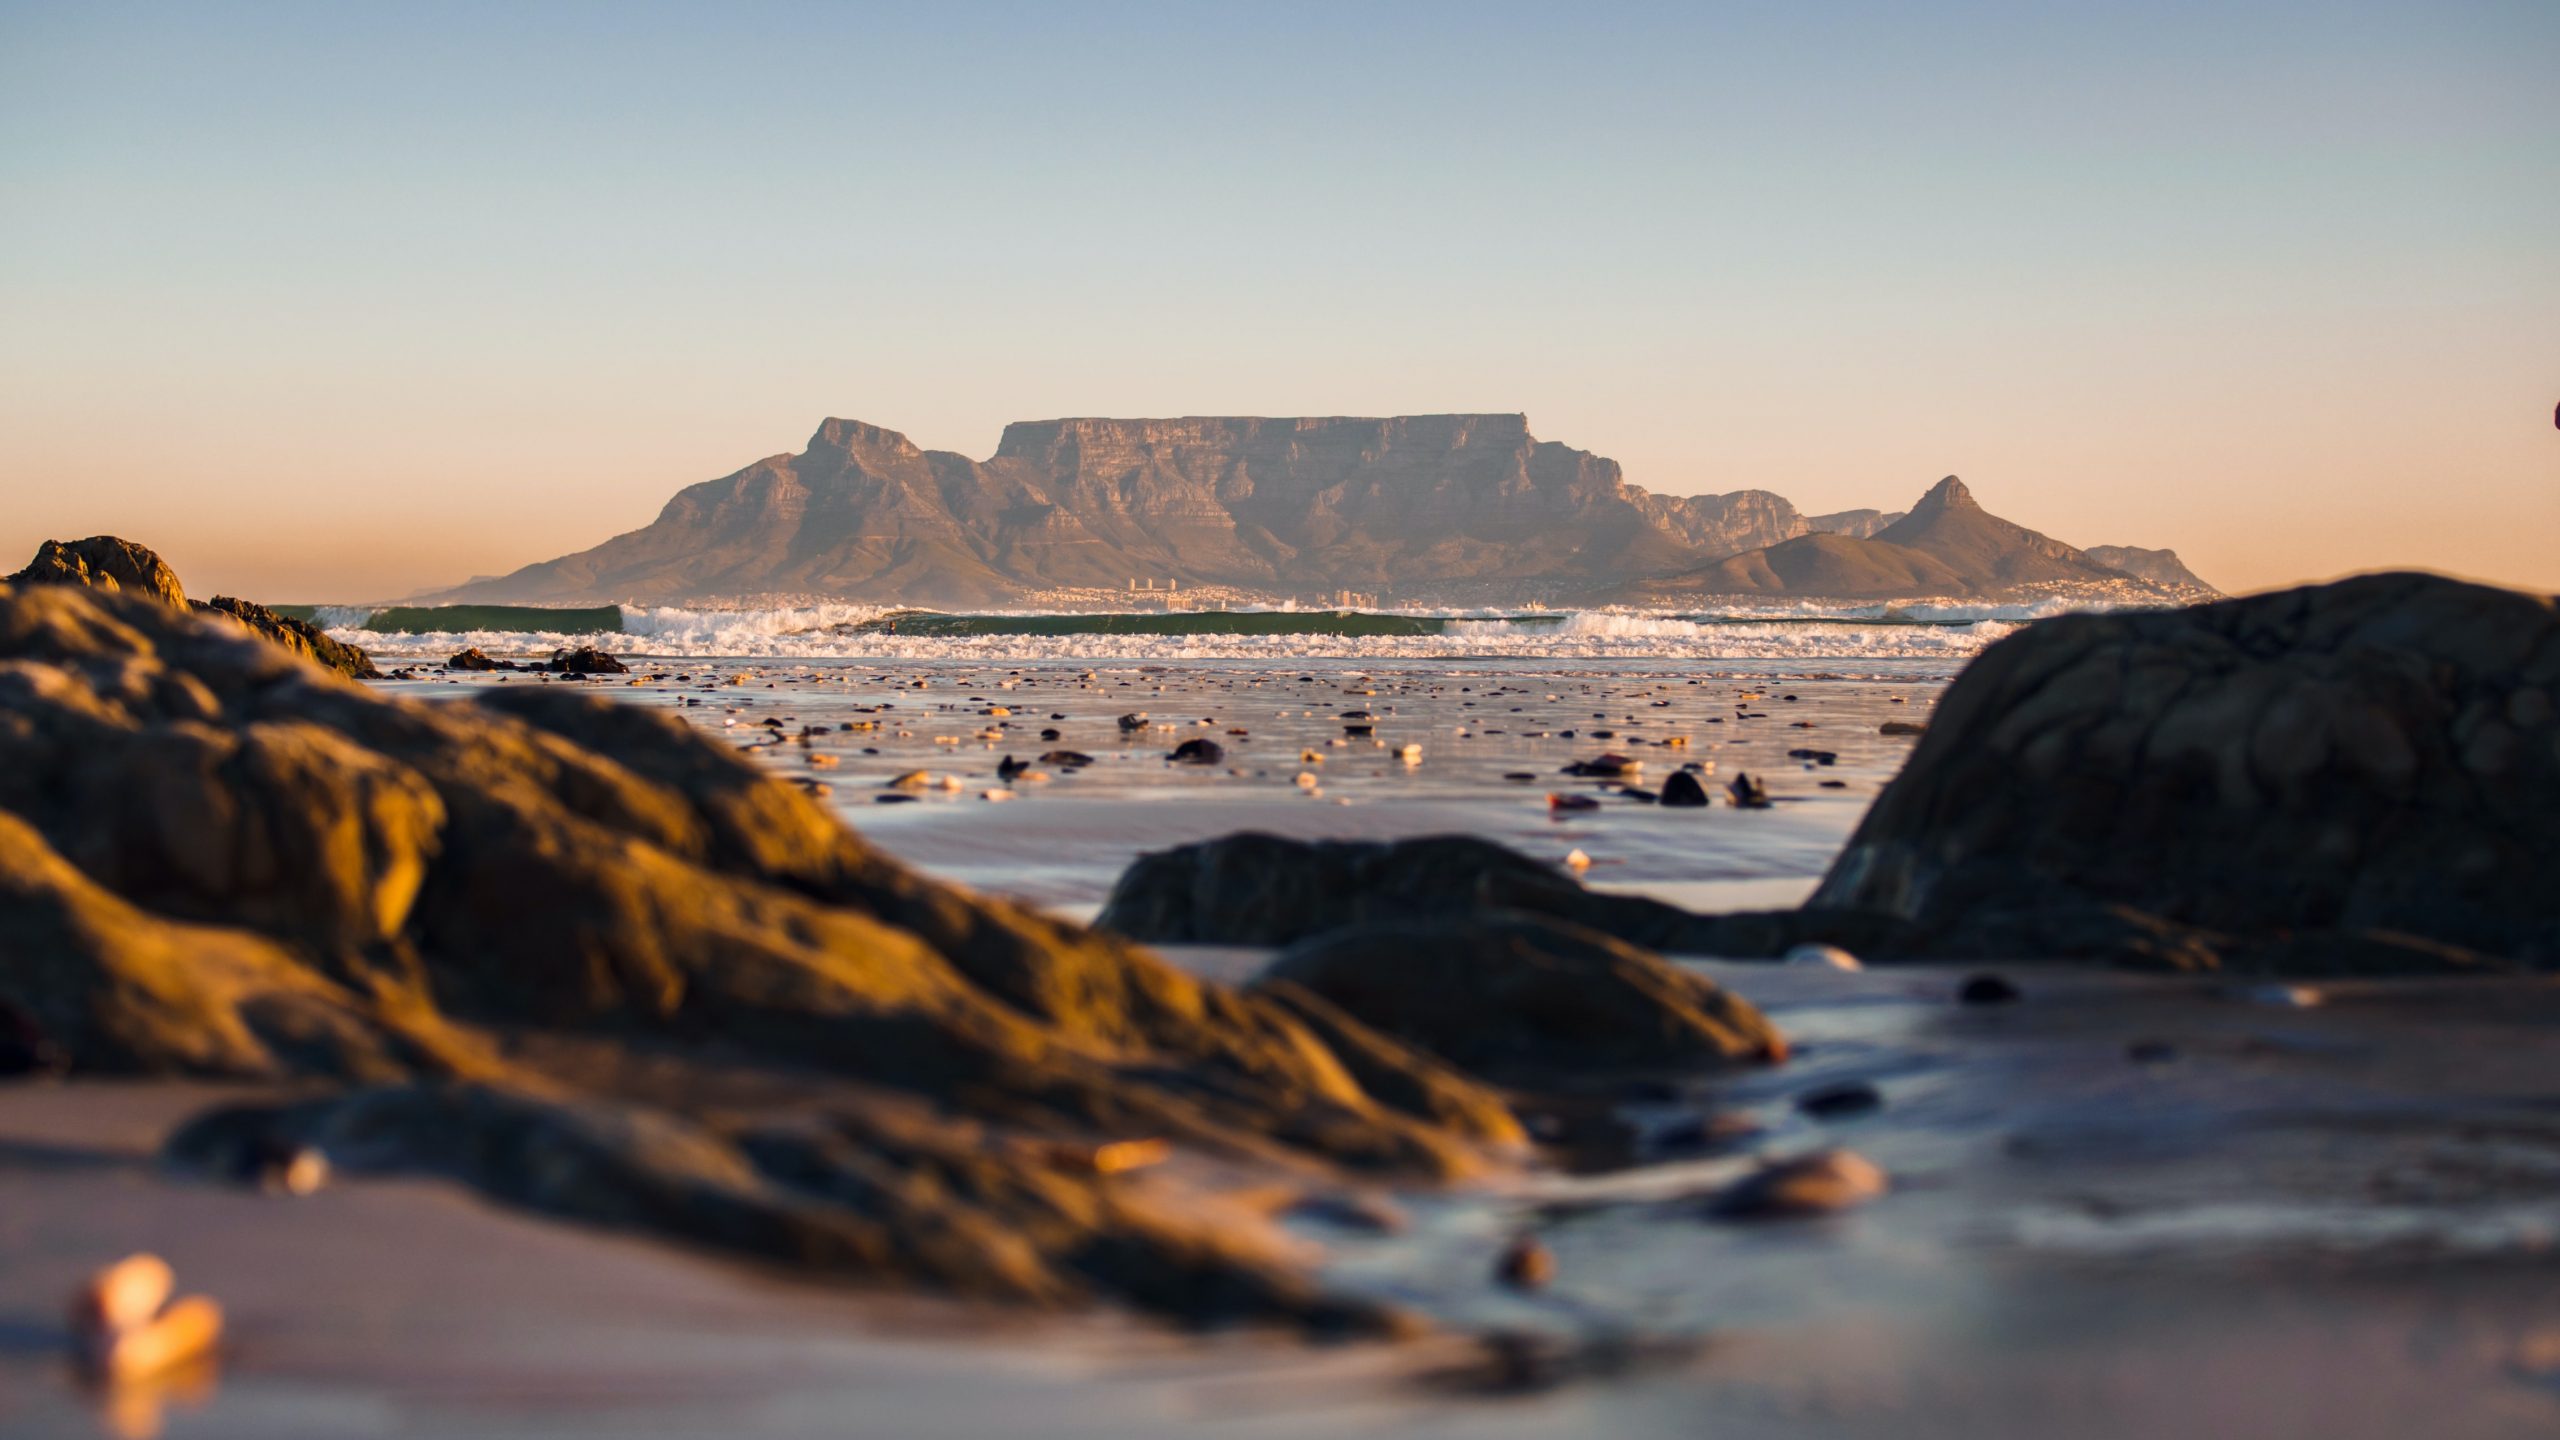 Image of Table Mountain